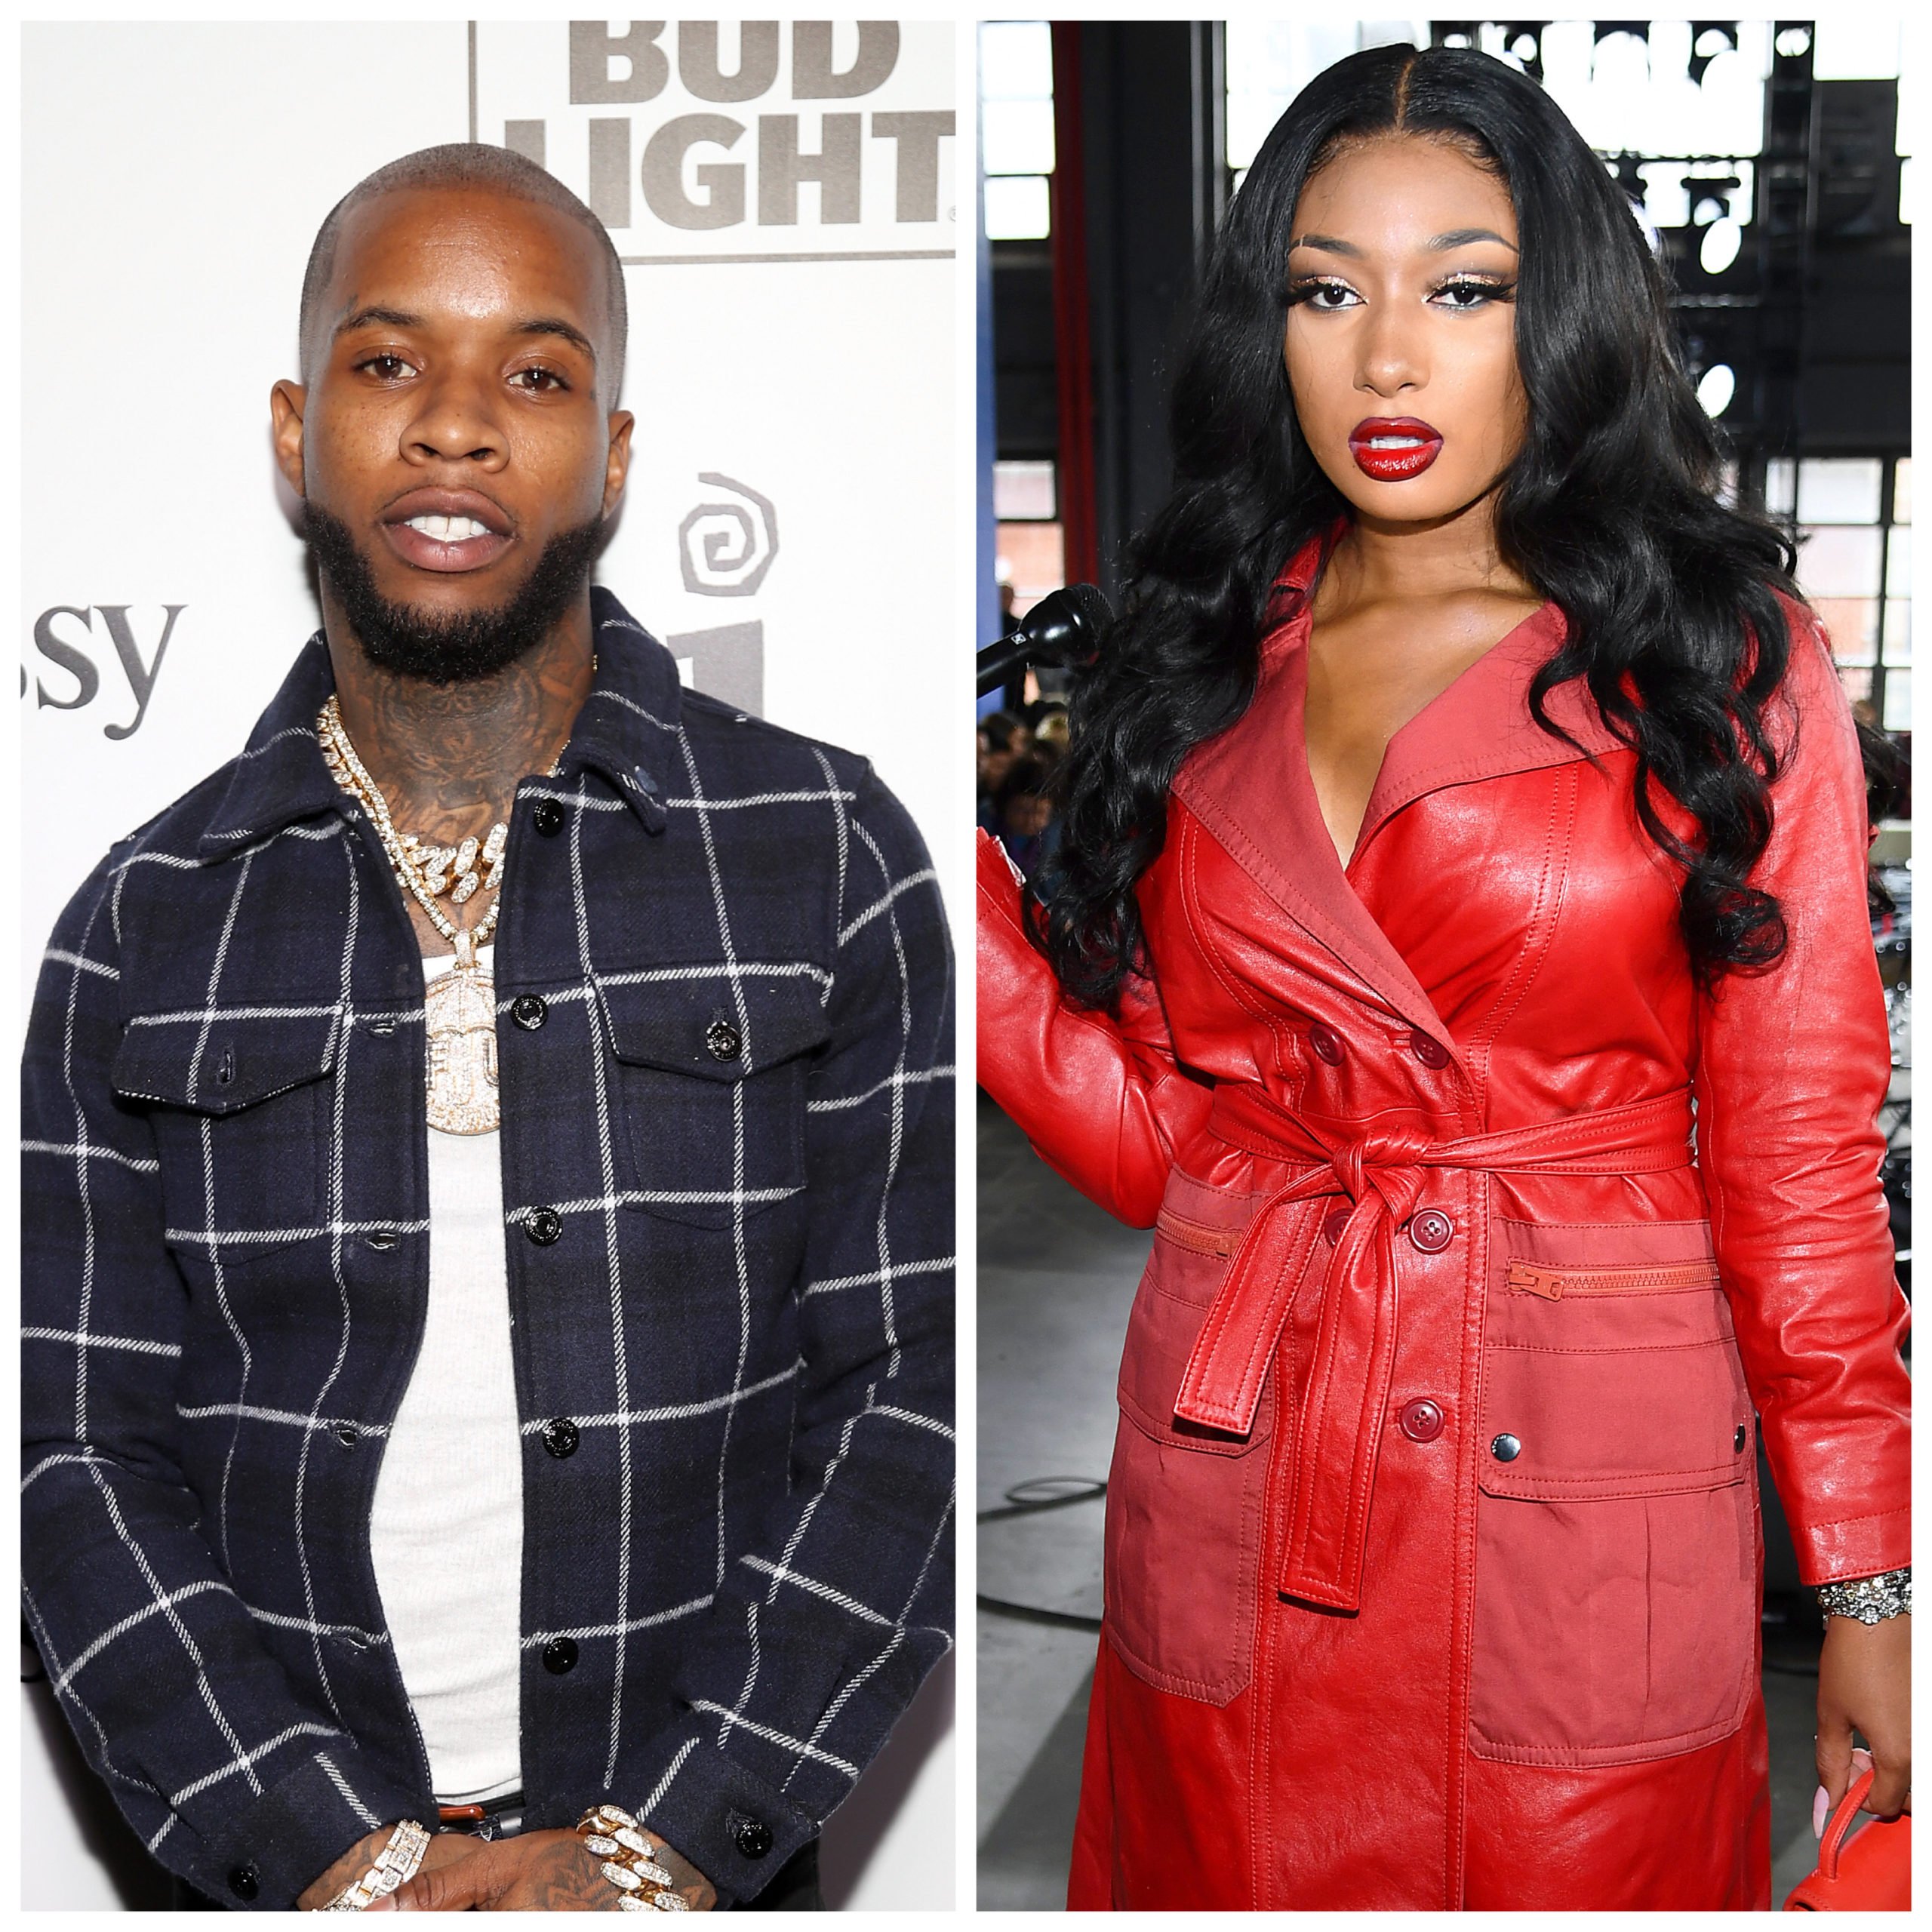 Judge Denies Motion To Lift Gag Order Off Of Tory Lanez In Megan Thee Stallion Case (Exclusive)